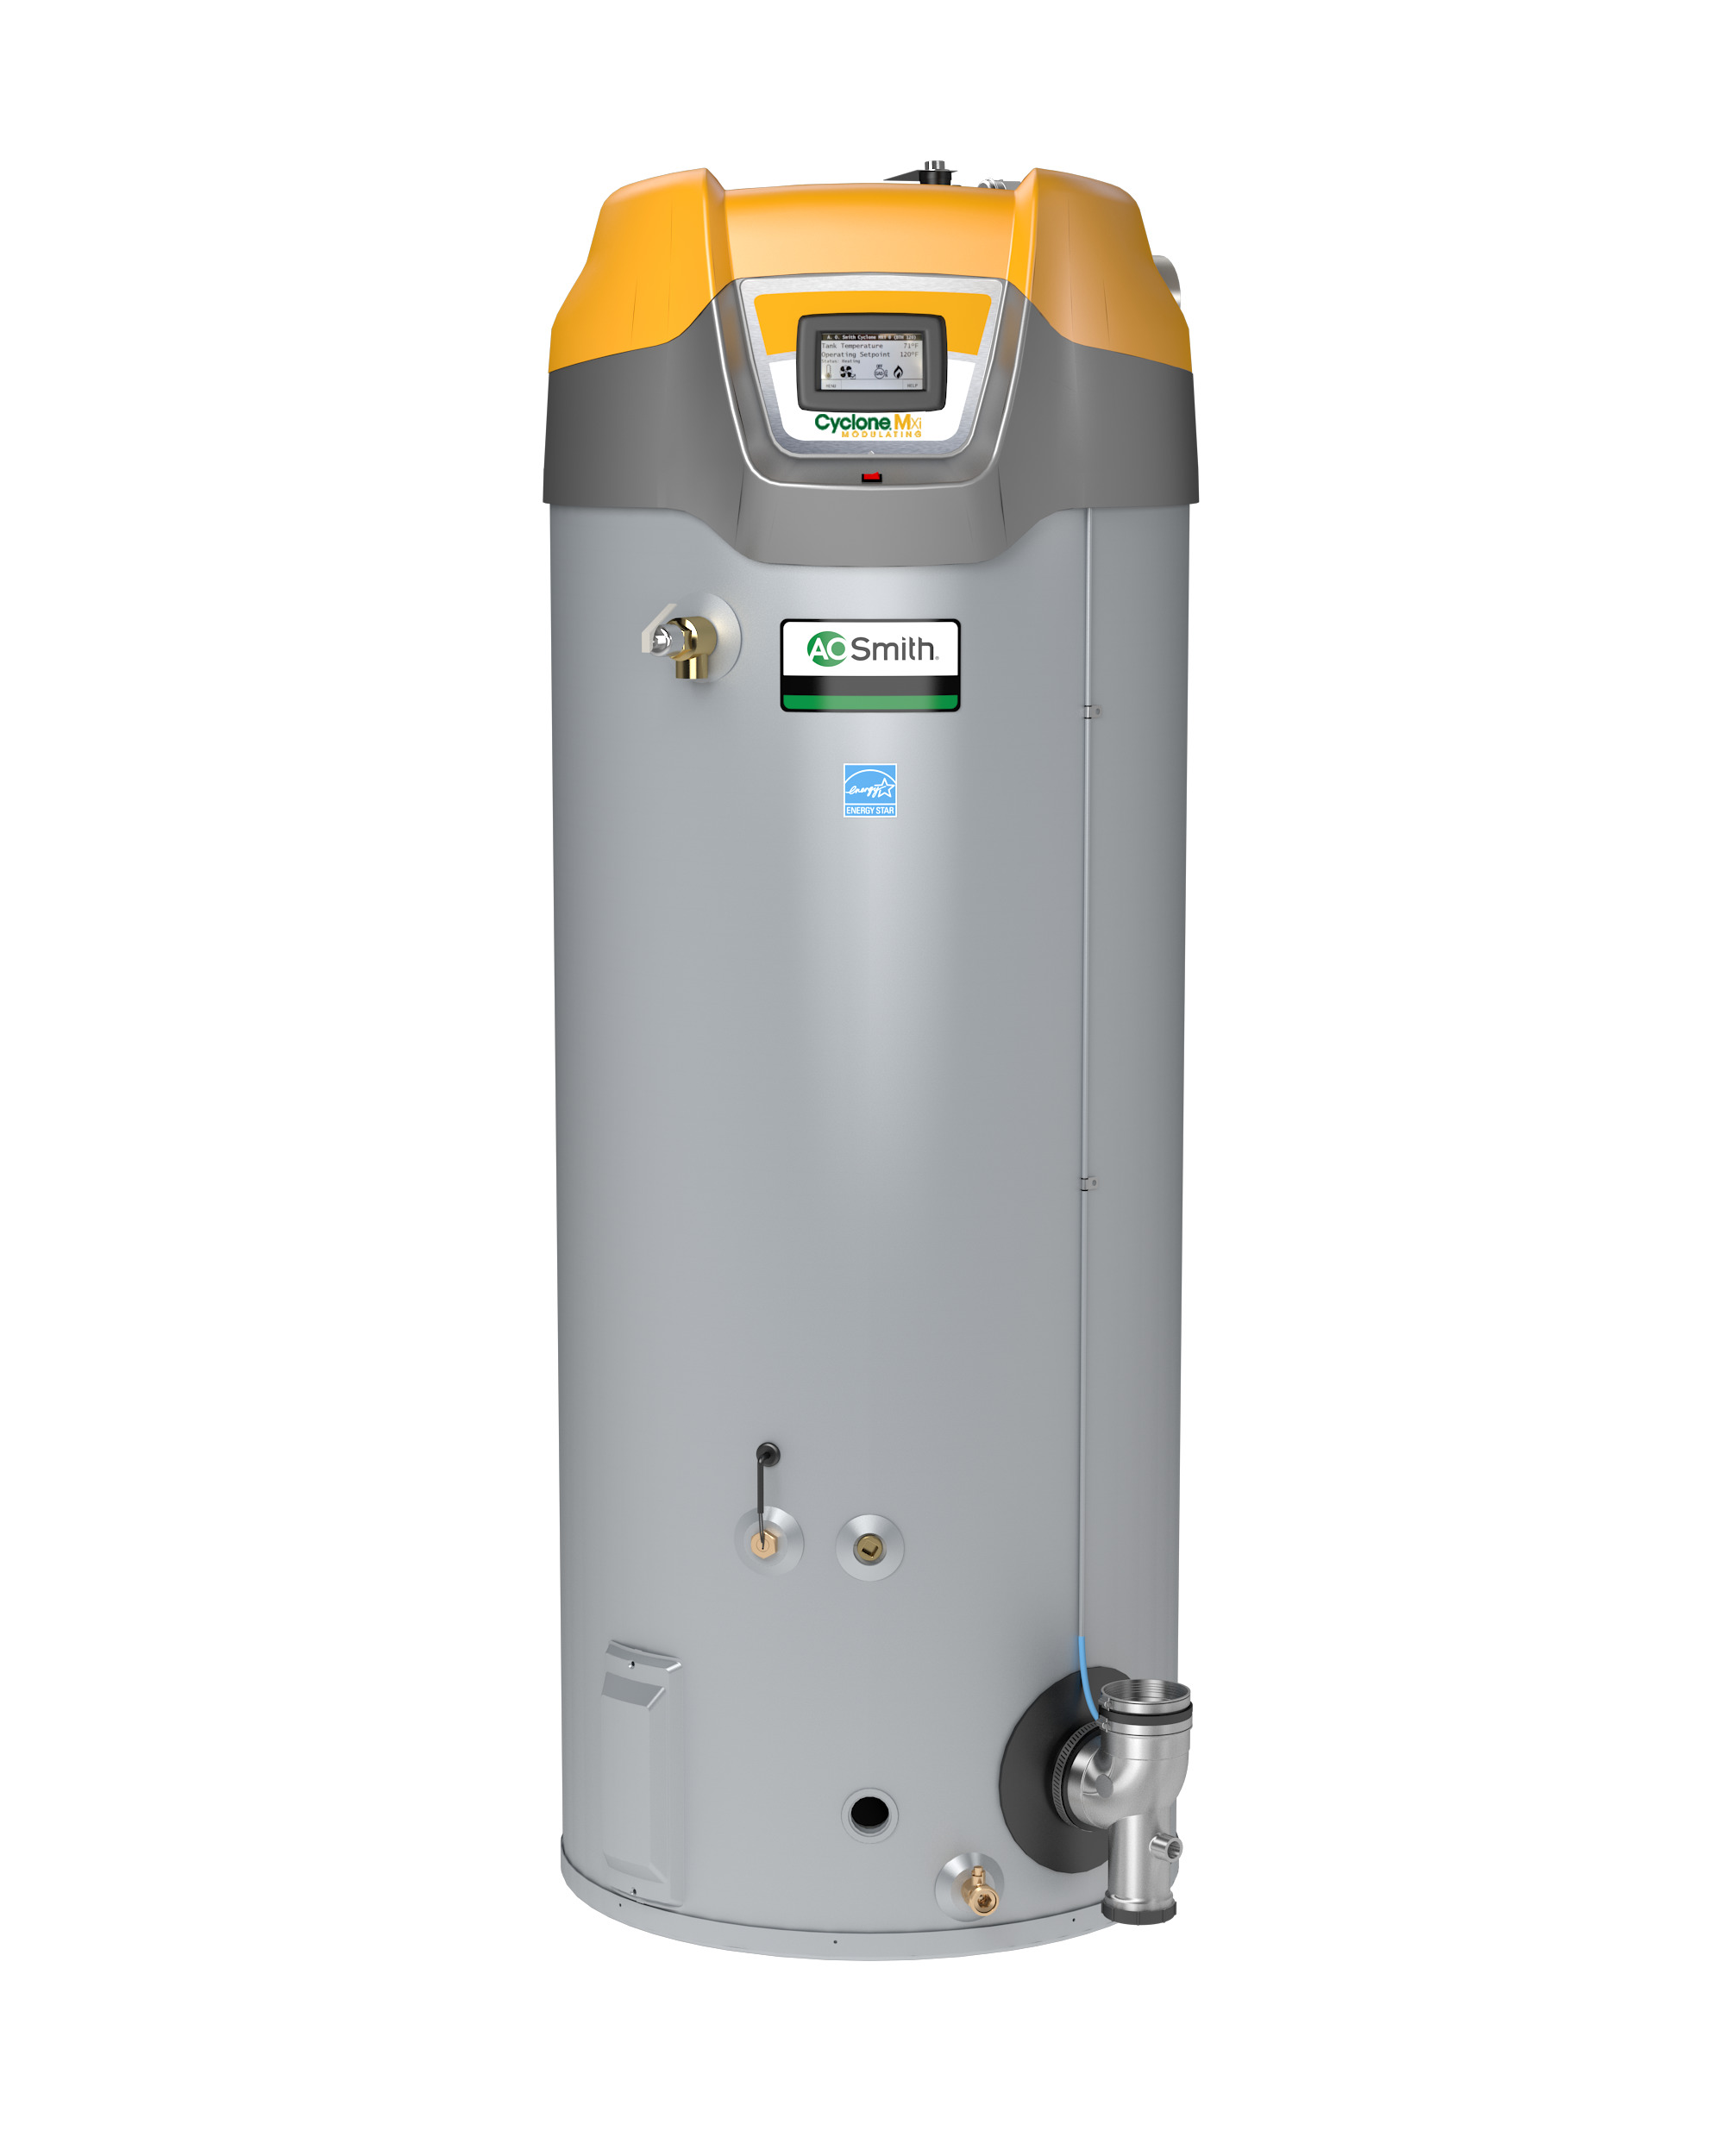 AO SMITH BTH-150A: 100 GALLON, 150,000 BTU, ASME, 3" VENT, UP TO 98% THERMAL EFFICIENCY, NATURAL GAS, CYCLONE Mxi MODULATING COMMERCIAL GAS WATER HEATER